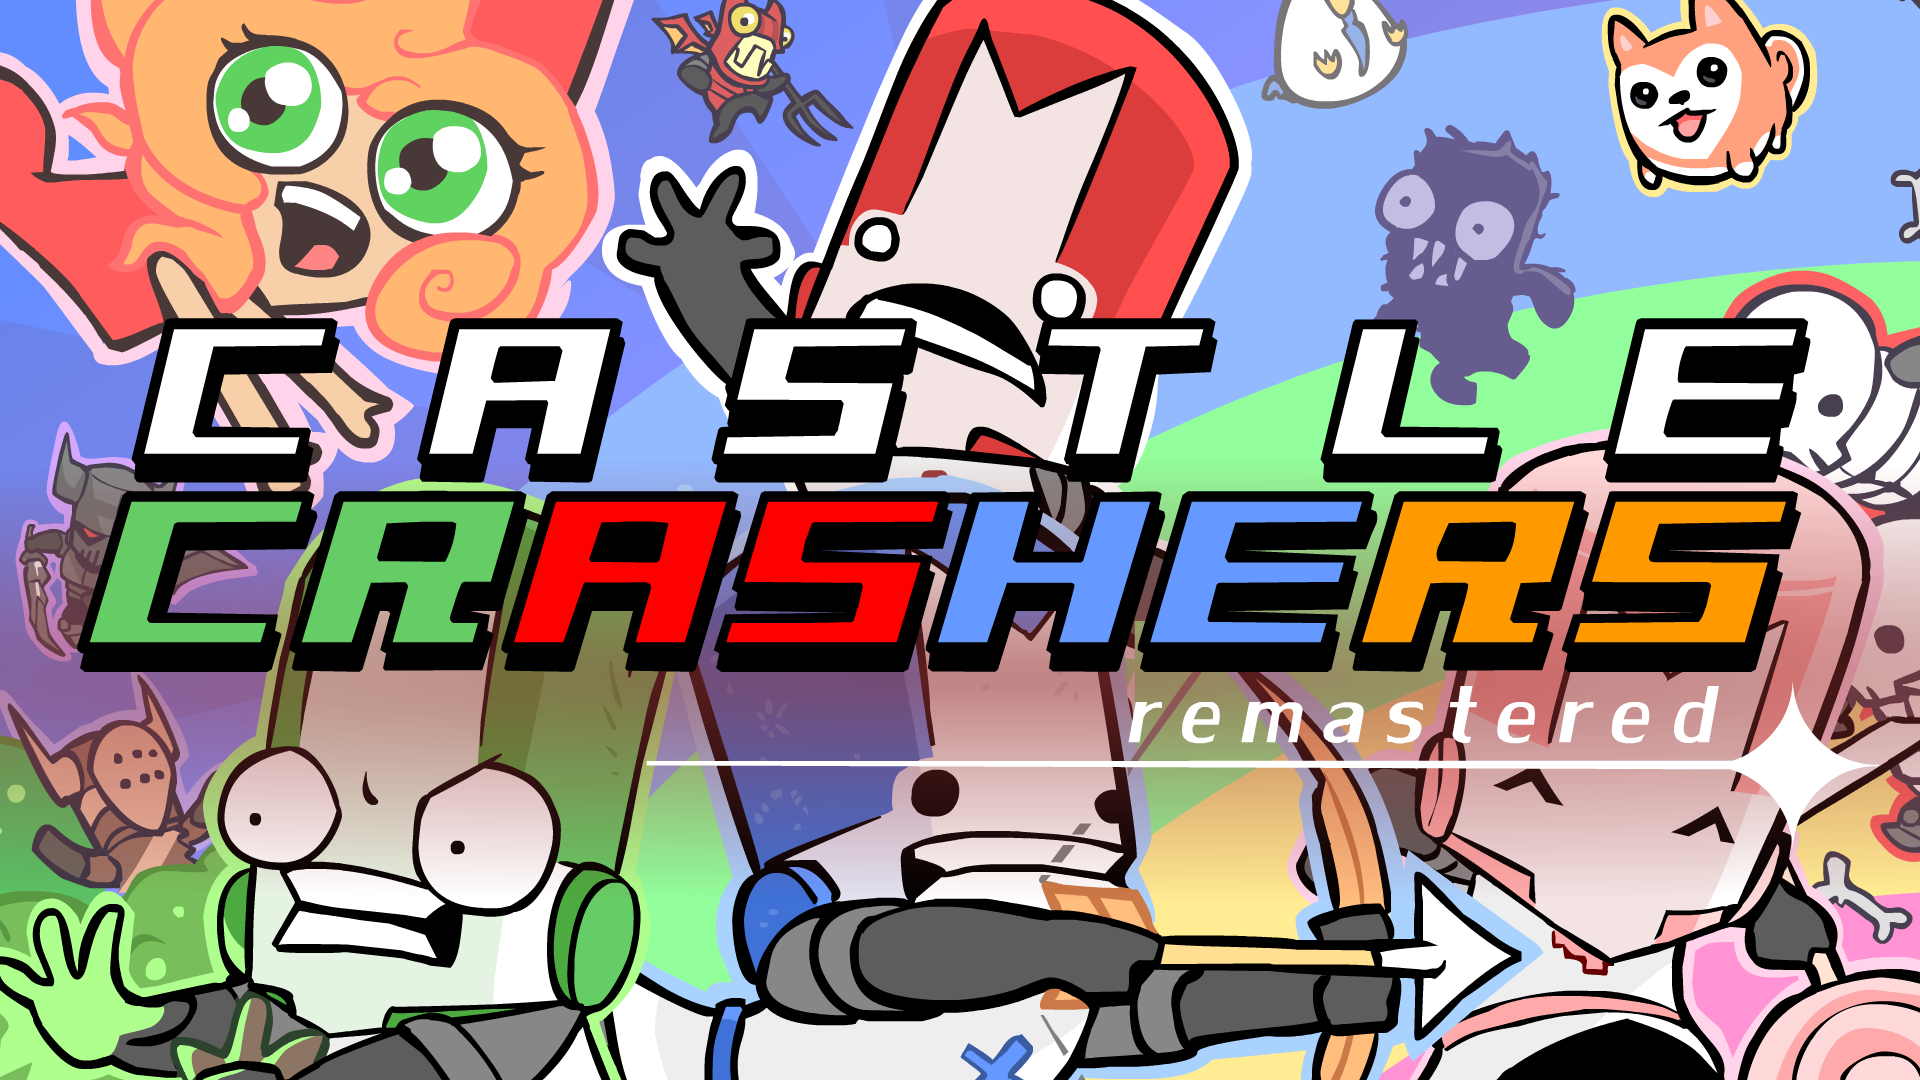 Castle Crashers character DLC now available on PSN